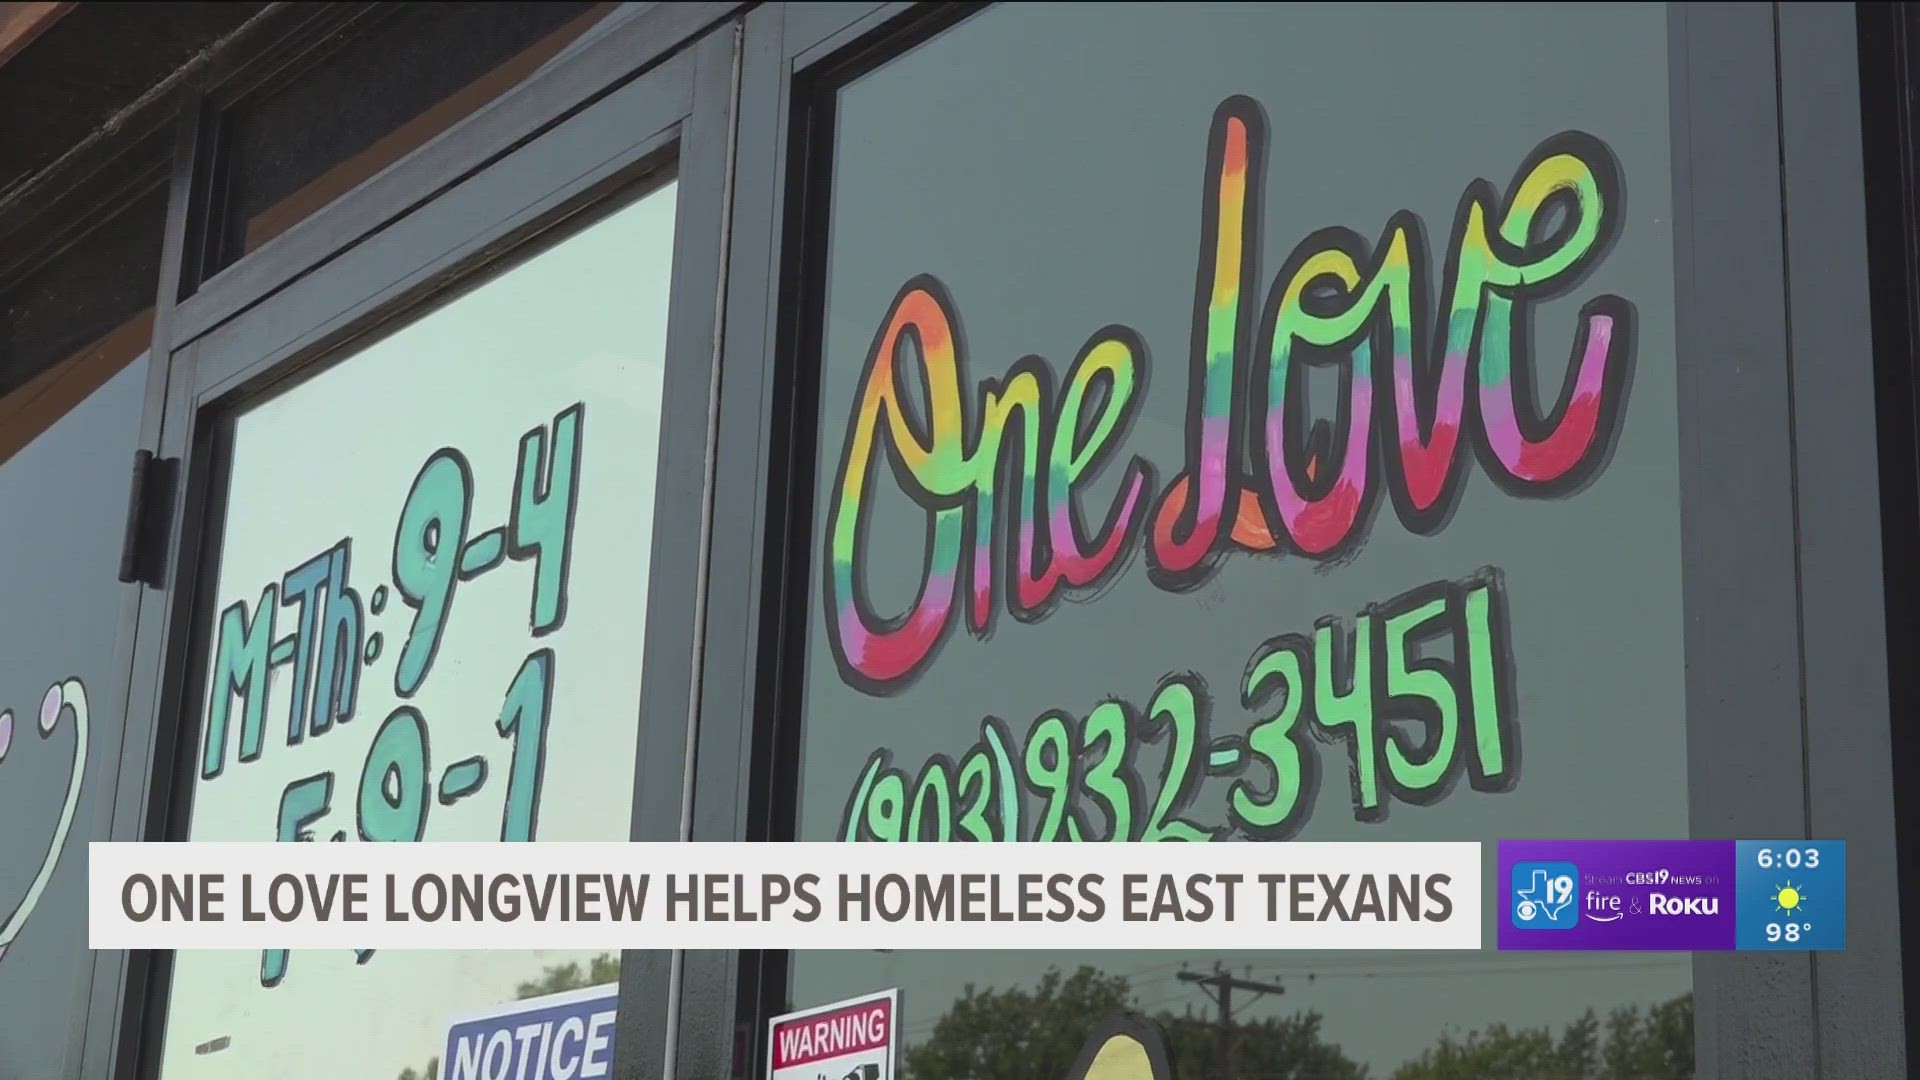 With a heat advisory in affect, volunteers at One Love Longview are taking the steps to protect the homeless community.